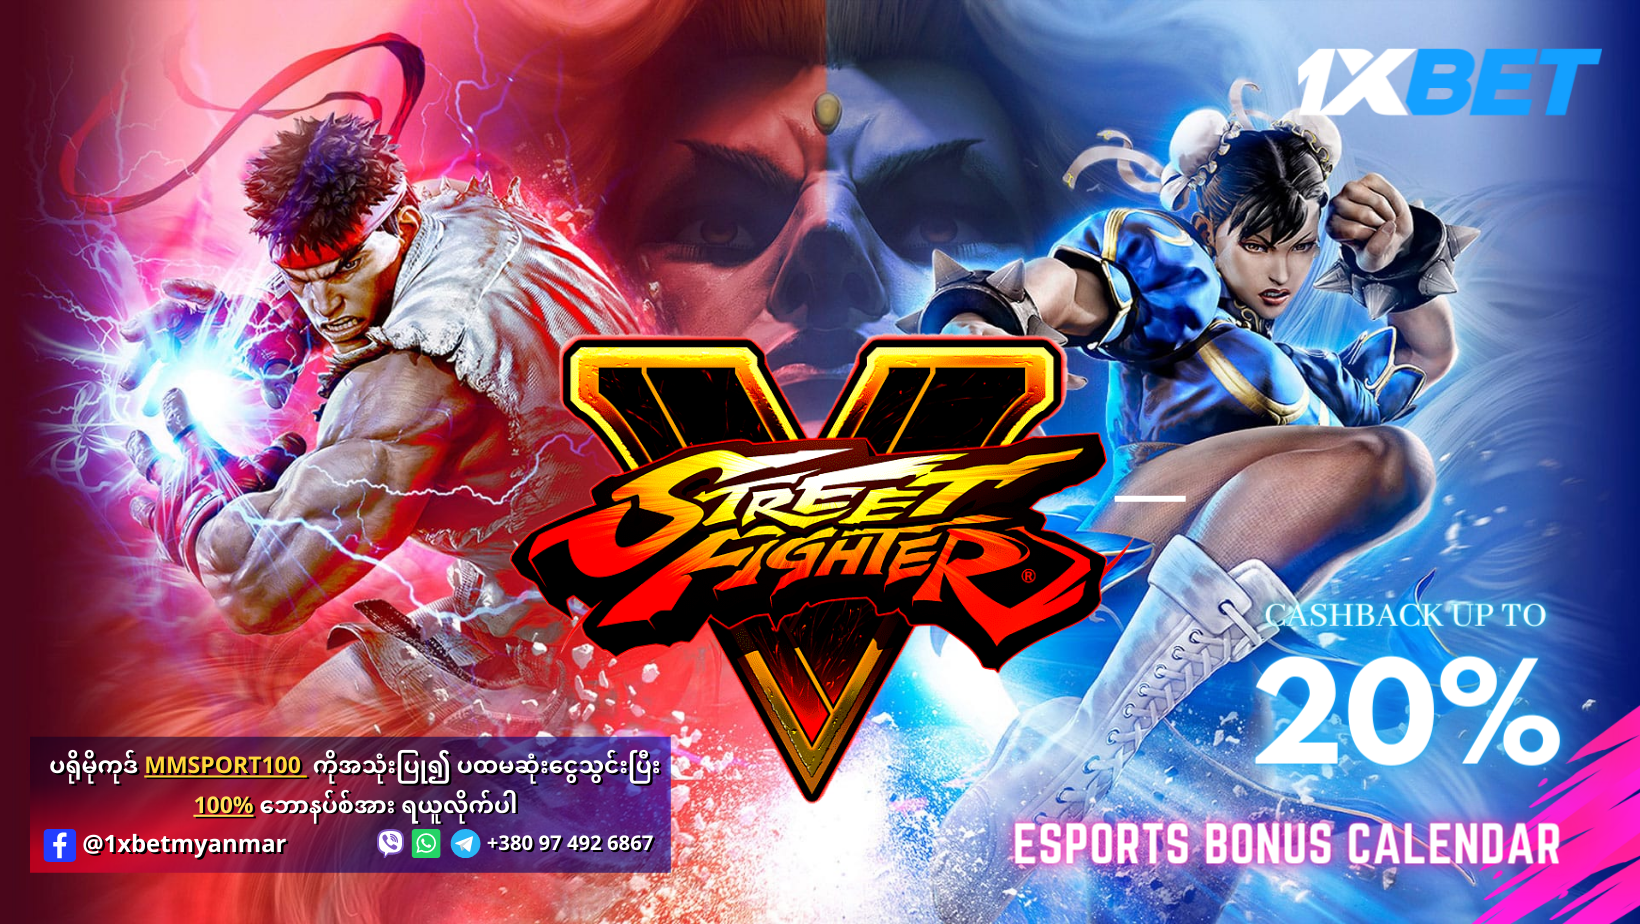 Street Fighter promotion 1xBet